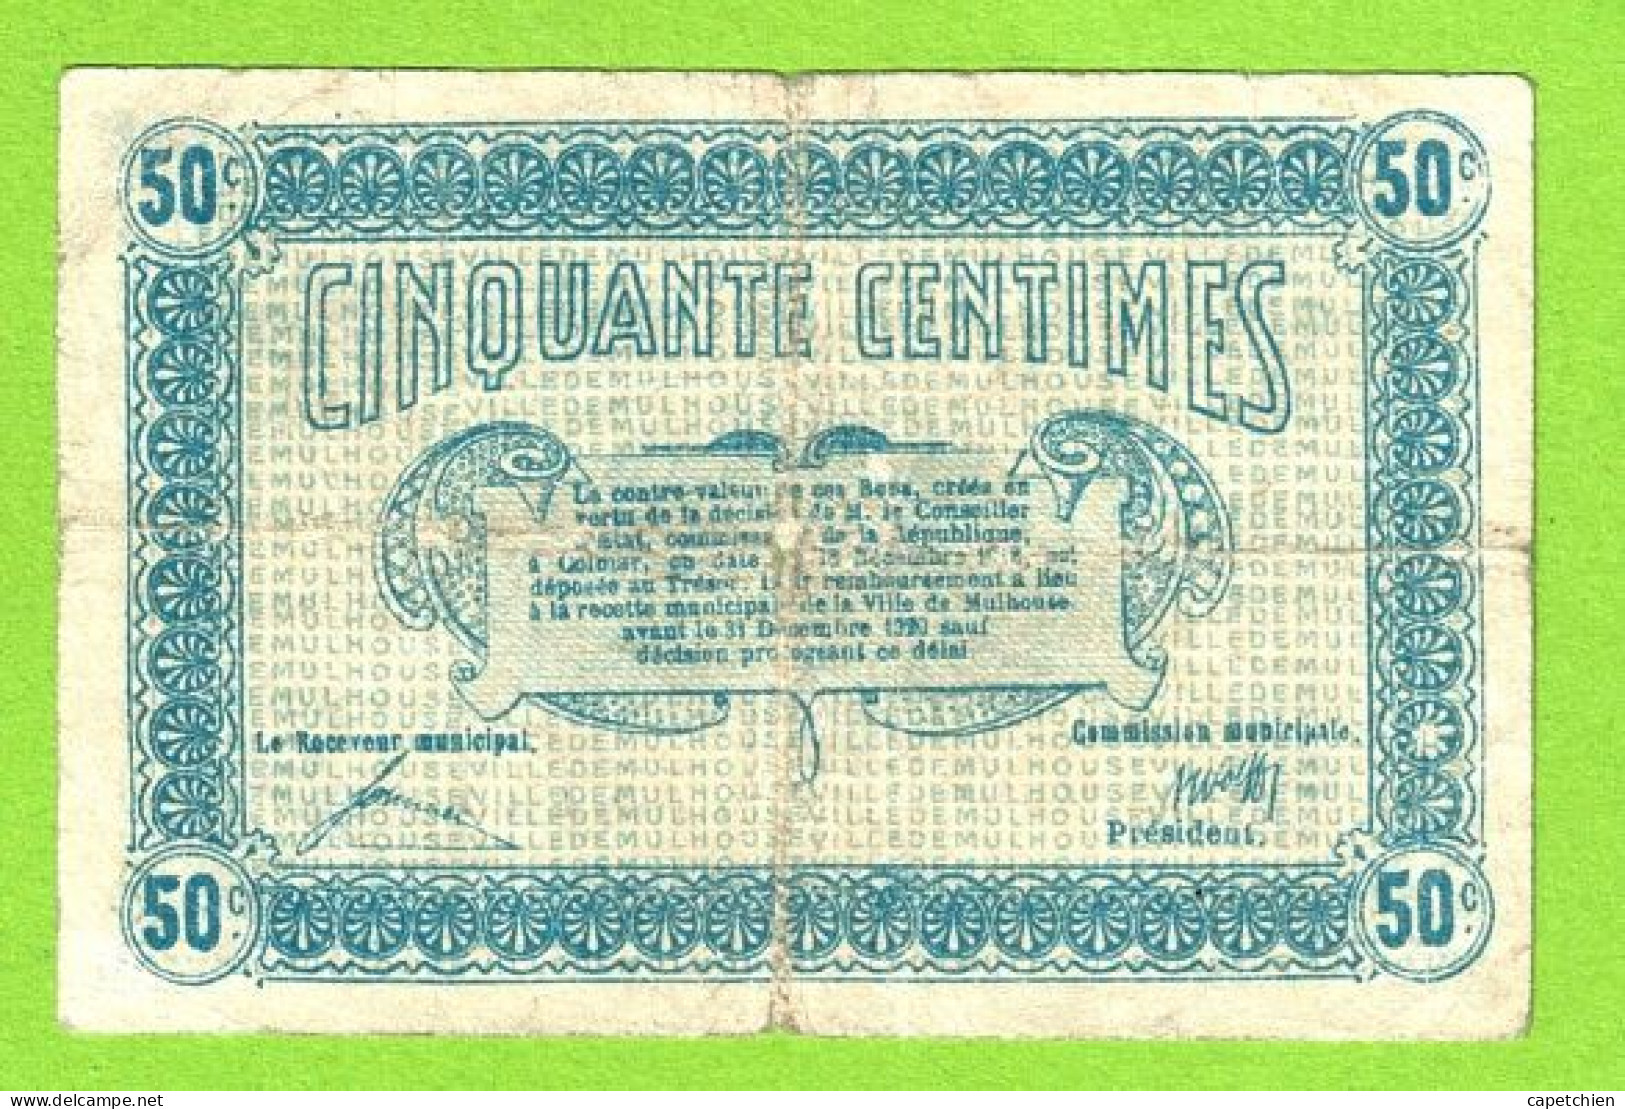 FRANCE / MULHOUSE / 50 CENTIMES / 28 DECEMBRE 1918 / N° 75143 - SERIE B - Chamber Of Commerce